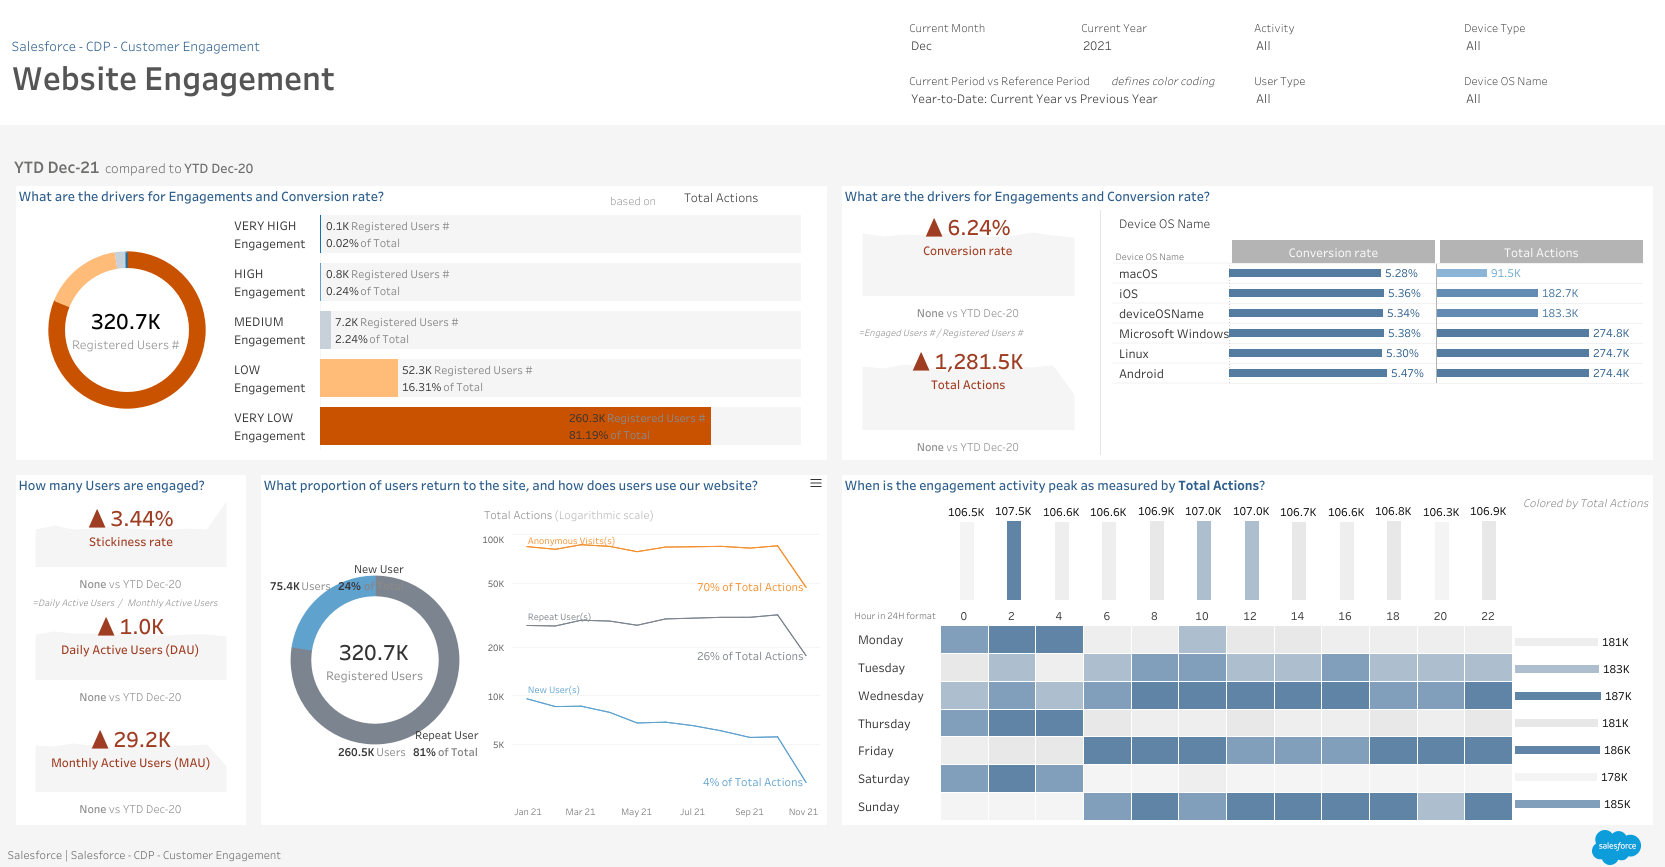 A dashboard displaying website engagement trends, KPIs, and insights.